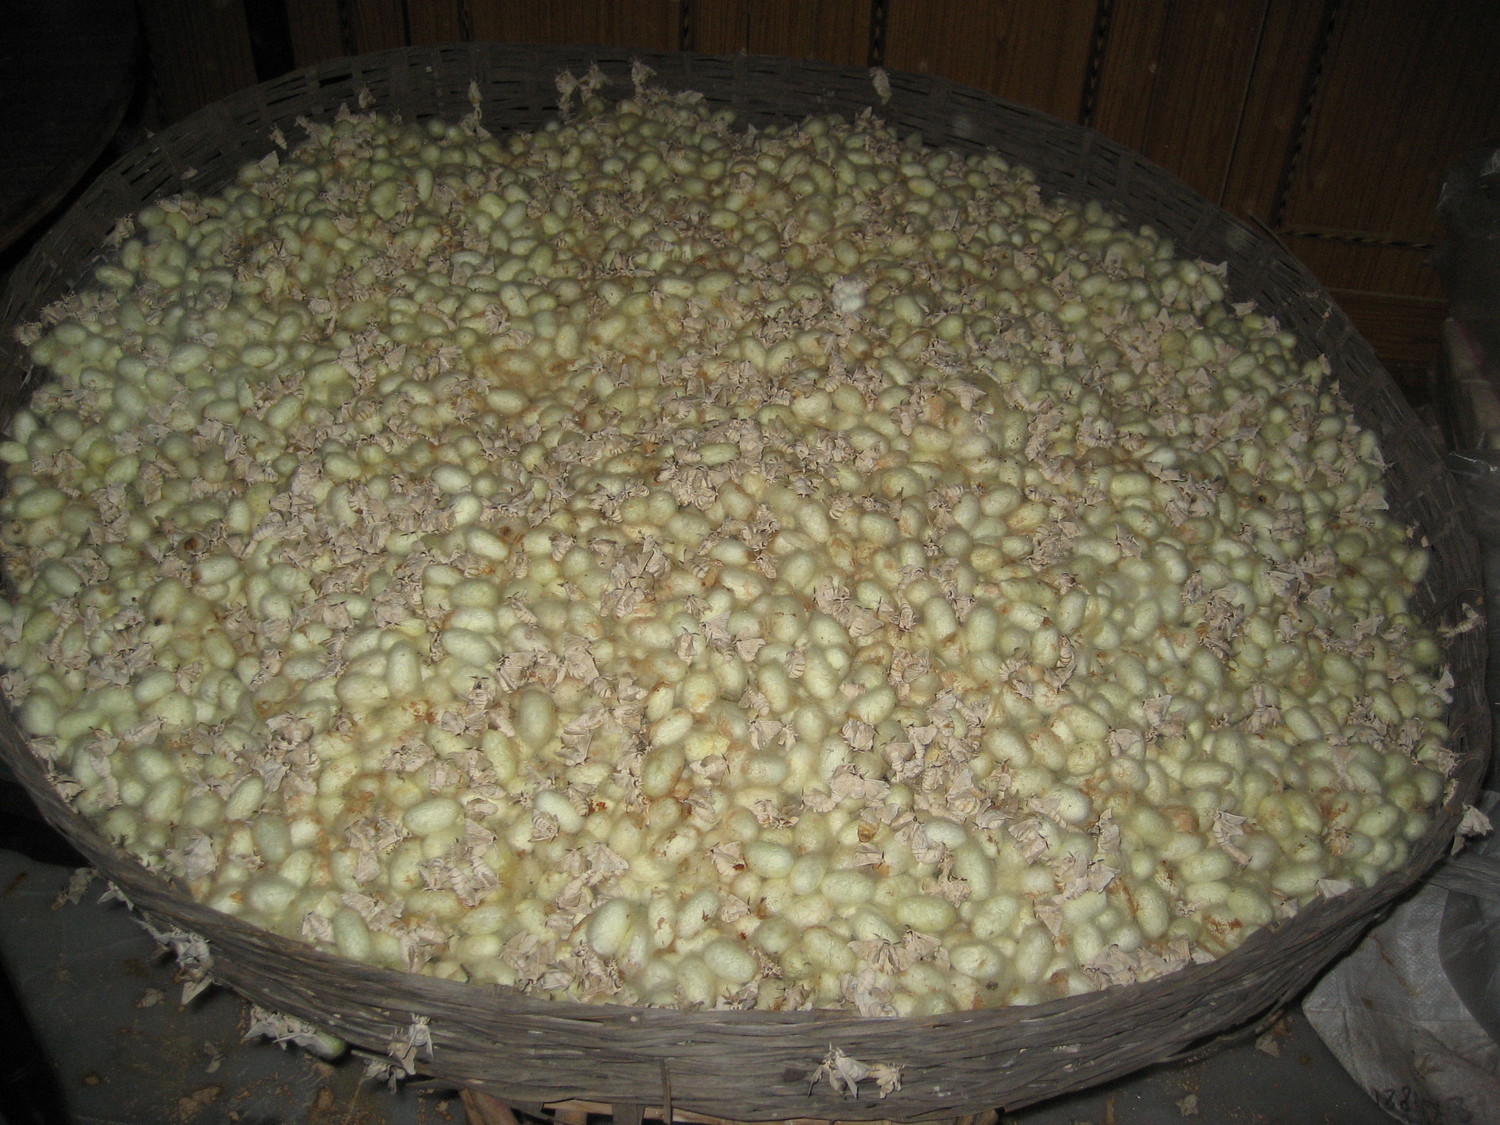 Mulberry Silk cocoons